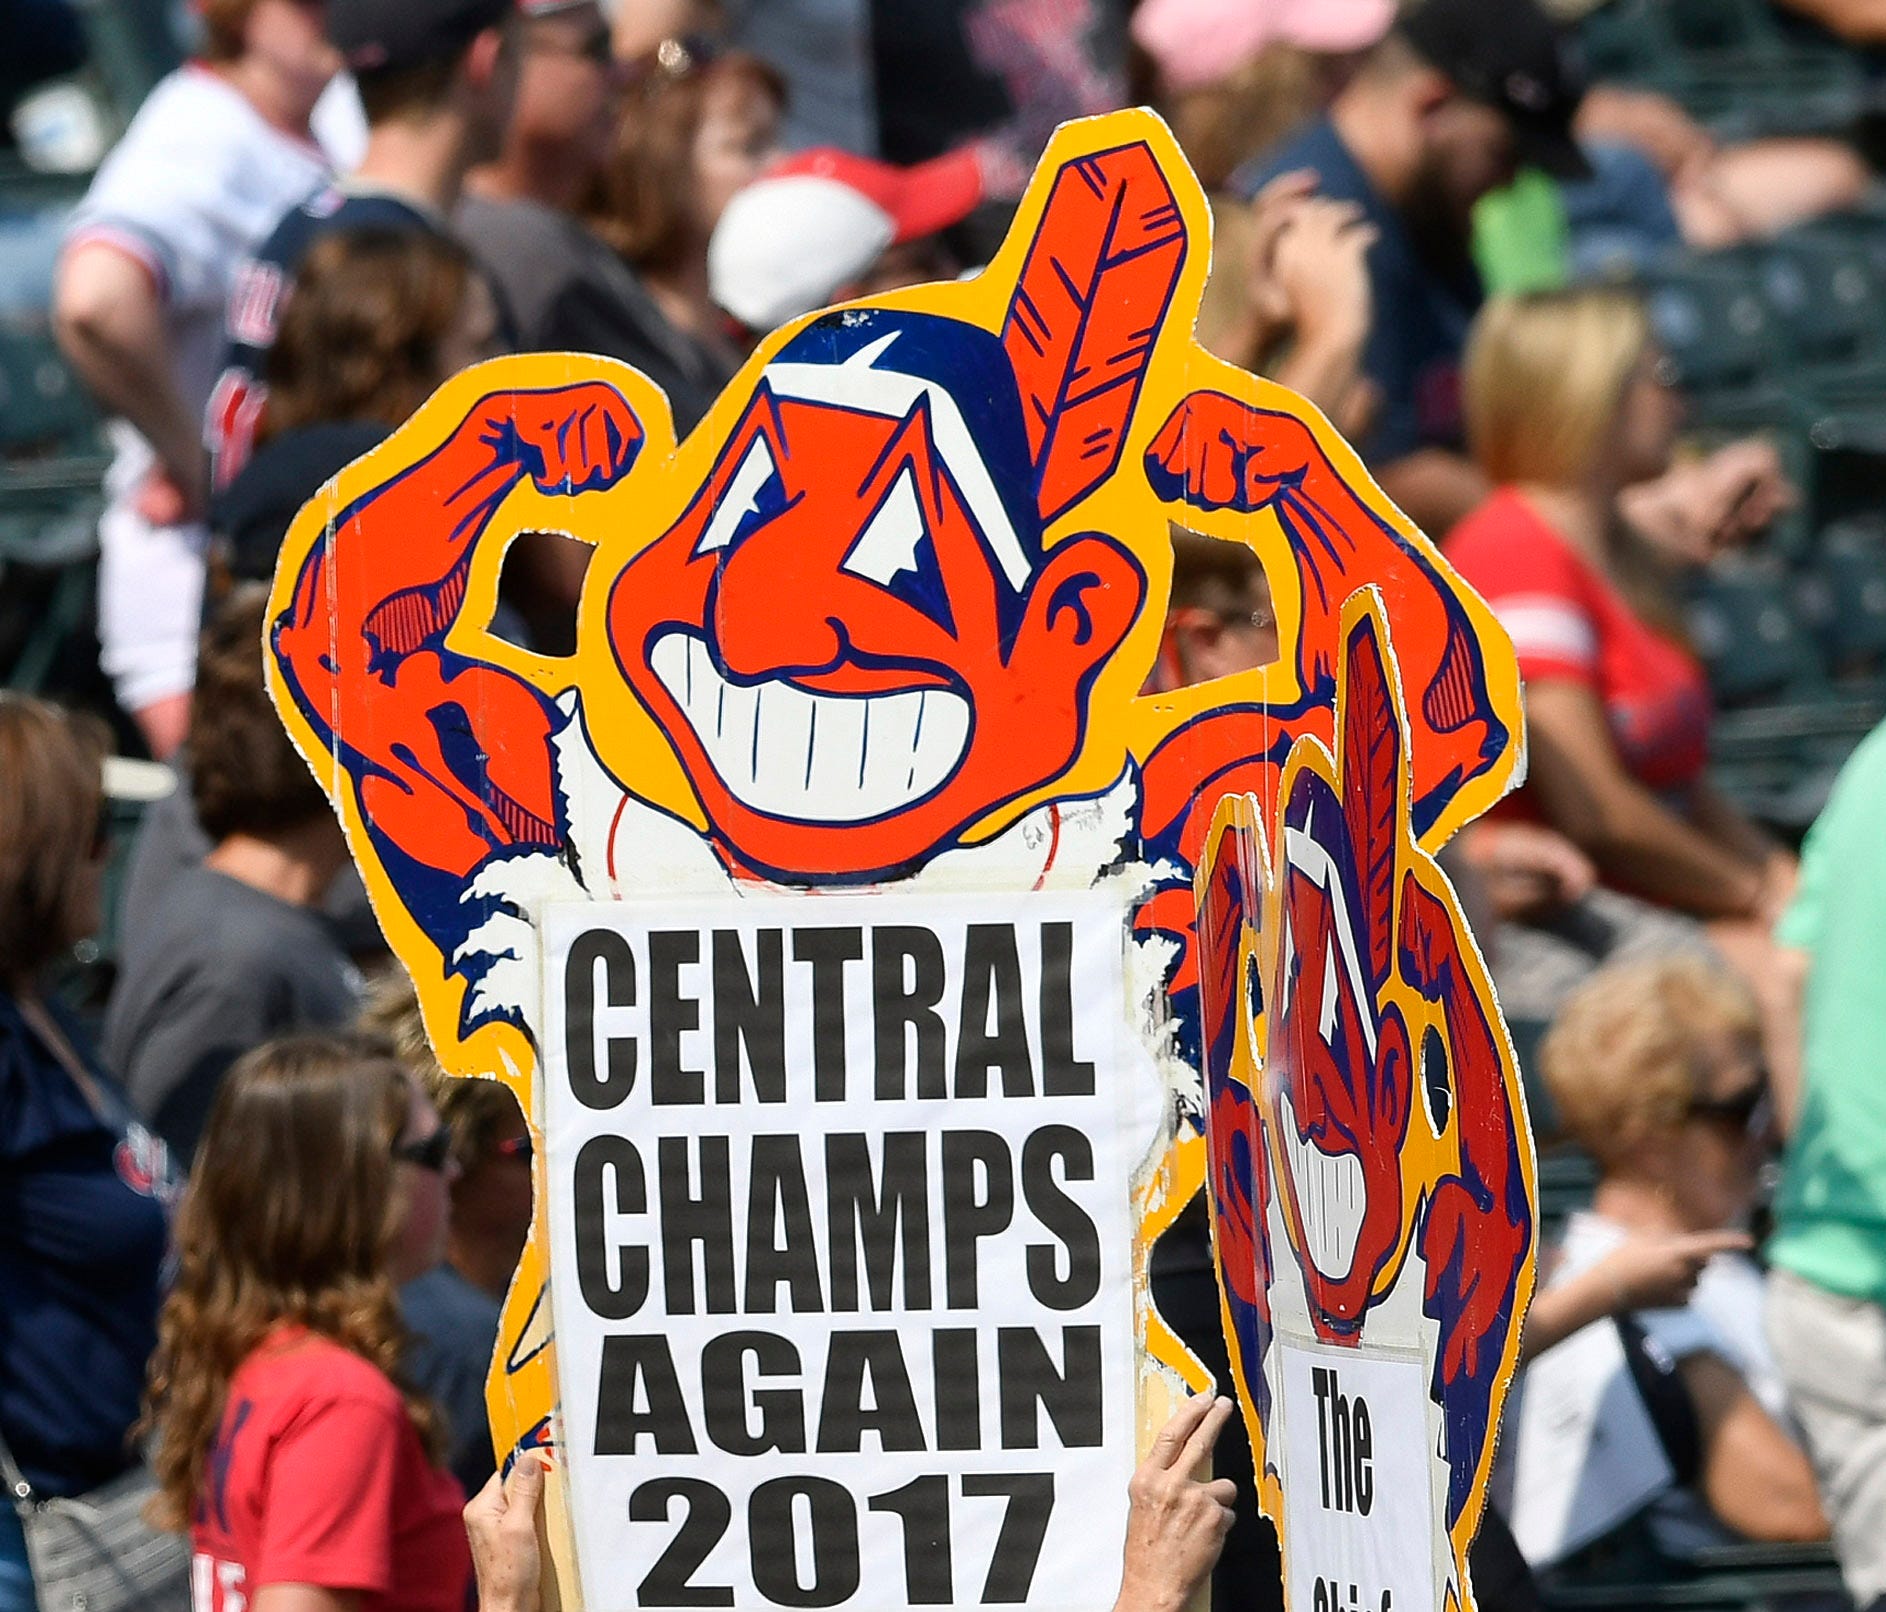 Sep 17, 2017; Cleveland, OH, USA; An Indians fan holds up a sign before a game between the Cleveland Indians and the Kansas City Royals at Progressive Field. Mandatory Credit: David Richard-USA TODAY Sports ORG XMIT: USATSI-353334 ORIG FILE ID:  2017